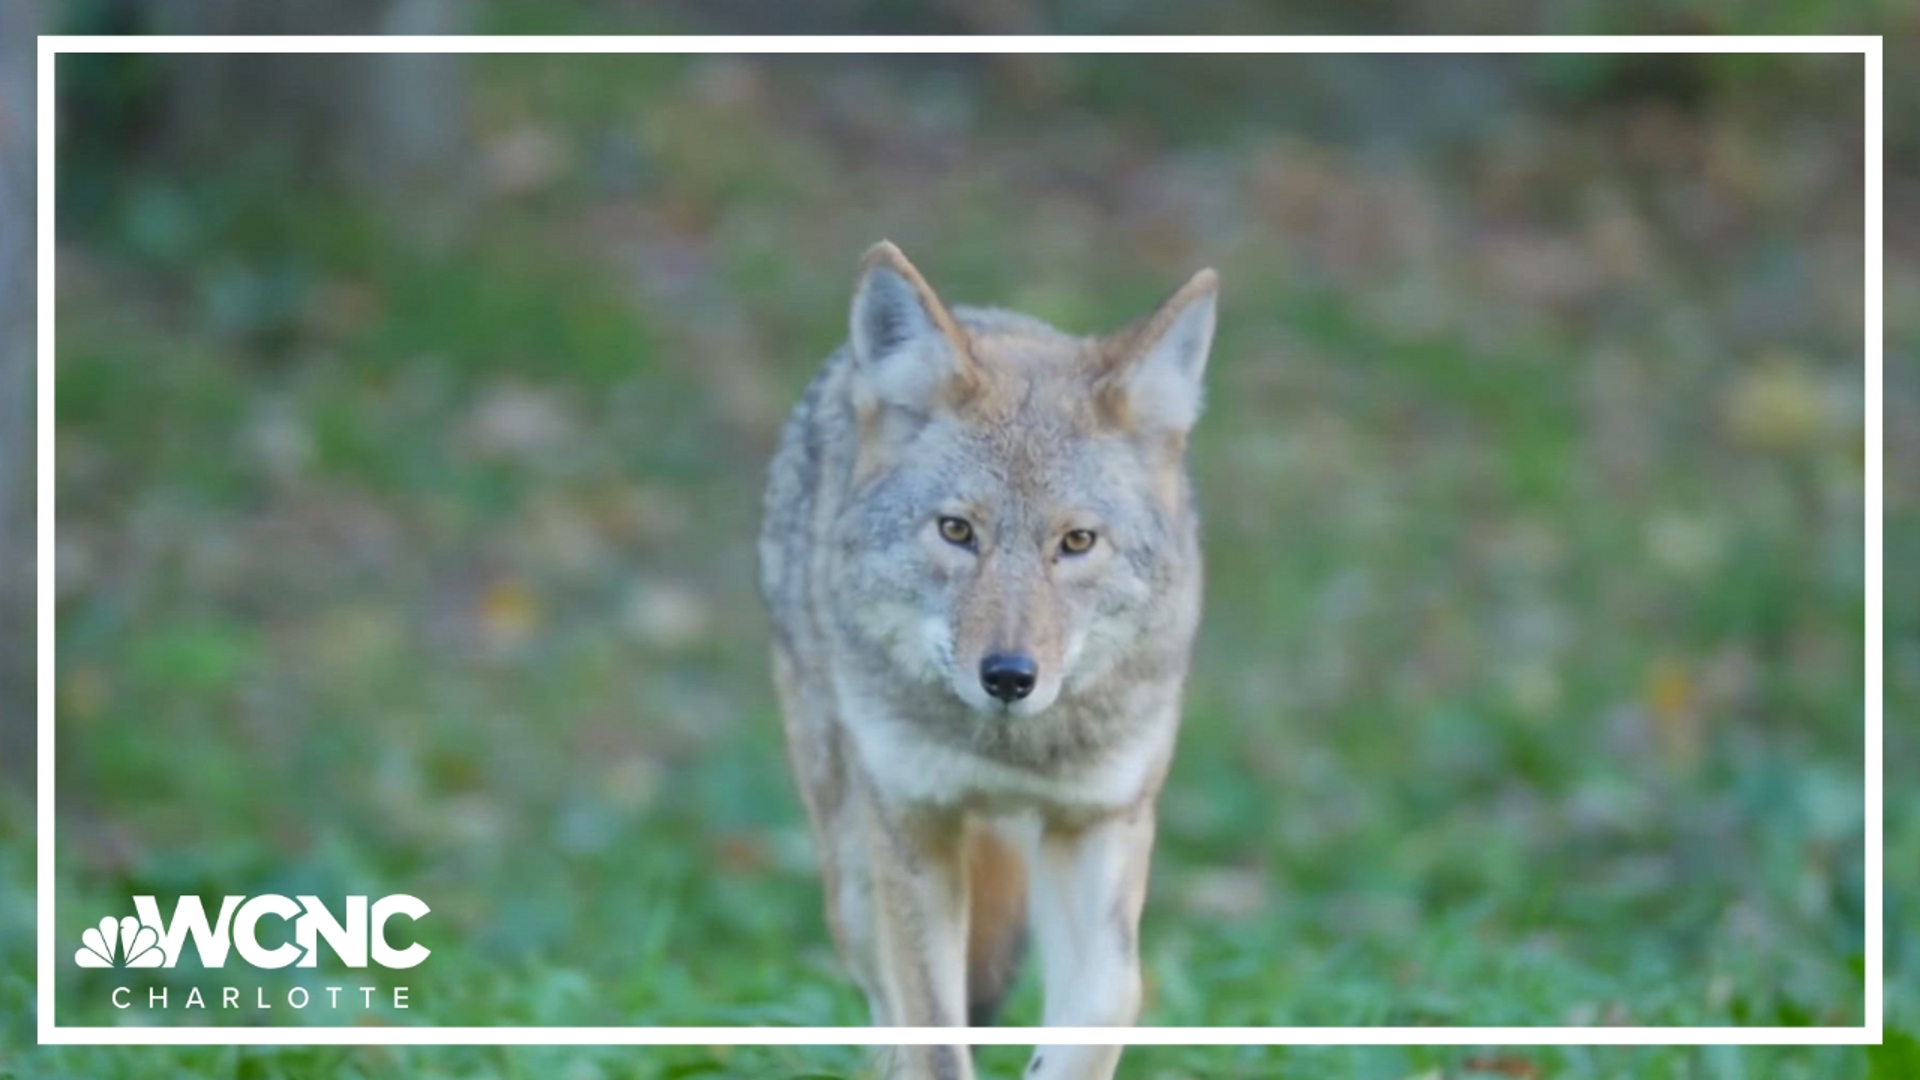 North Carolina National Forests officials are encouraging visitors to use extra caution after a recent coyote attack.